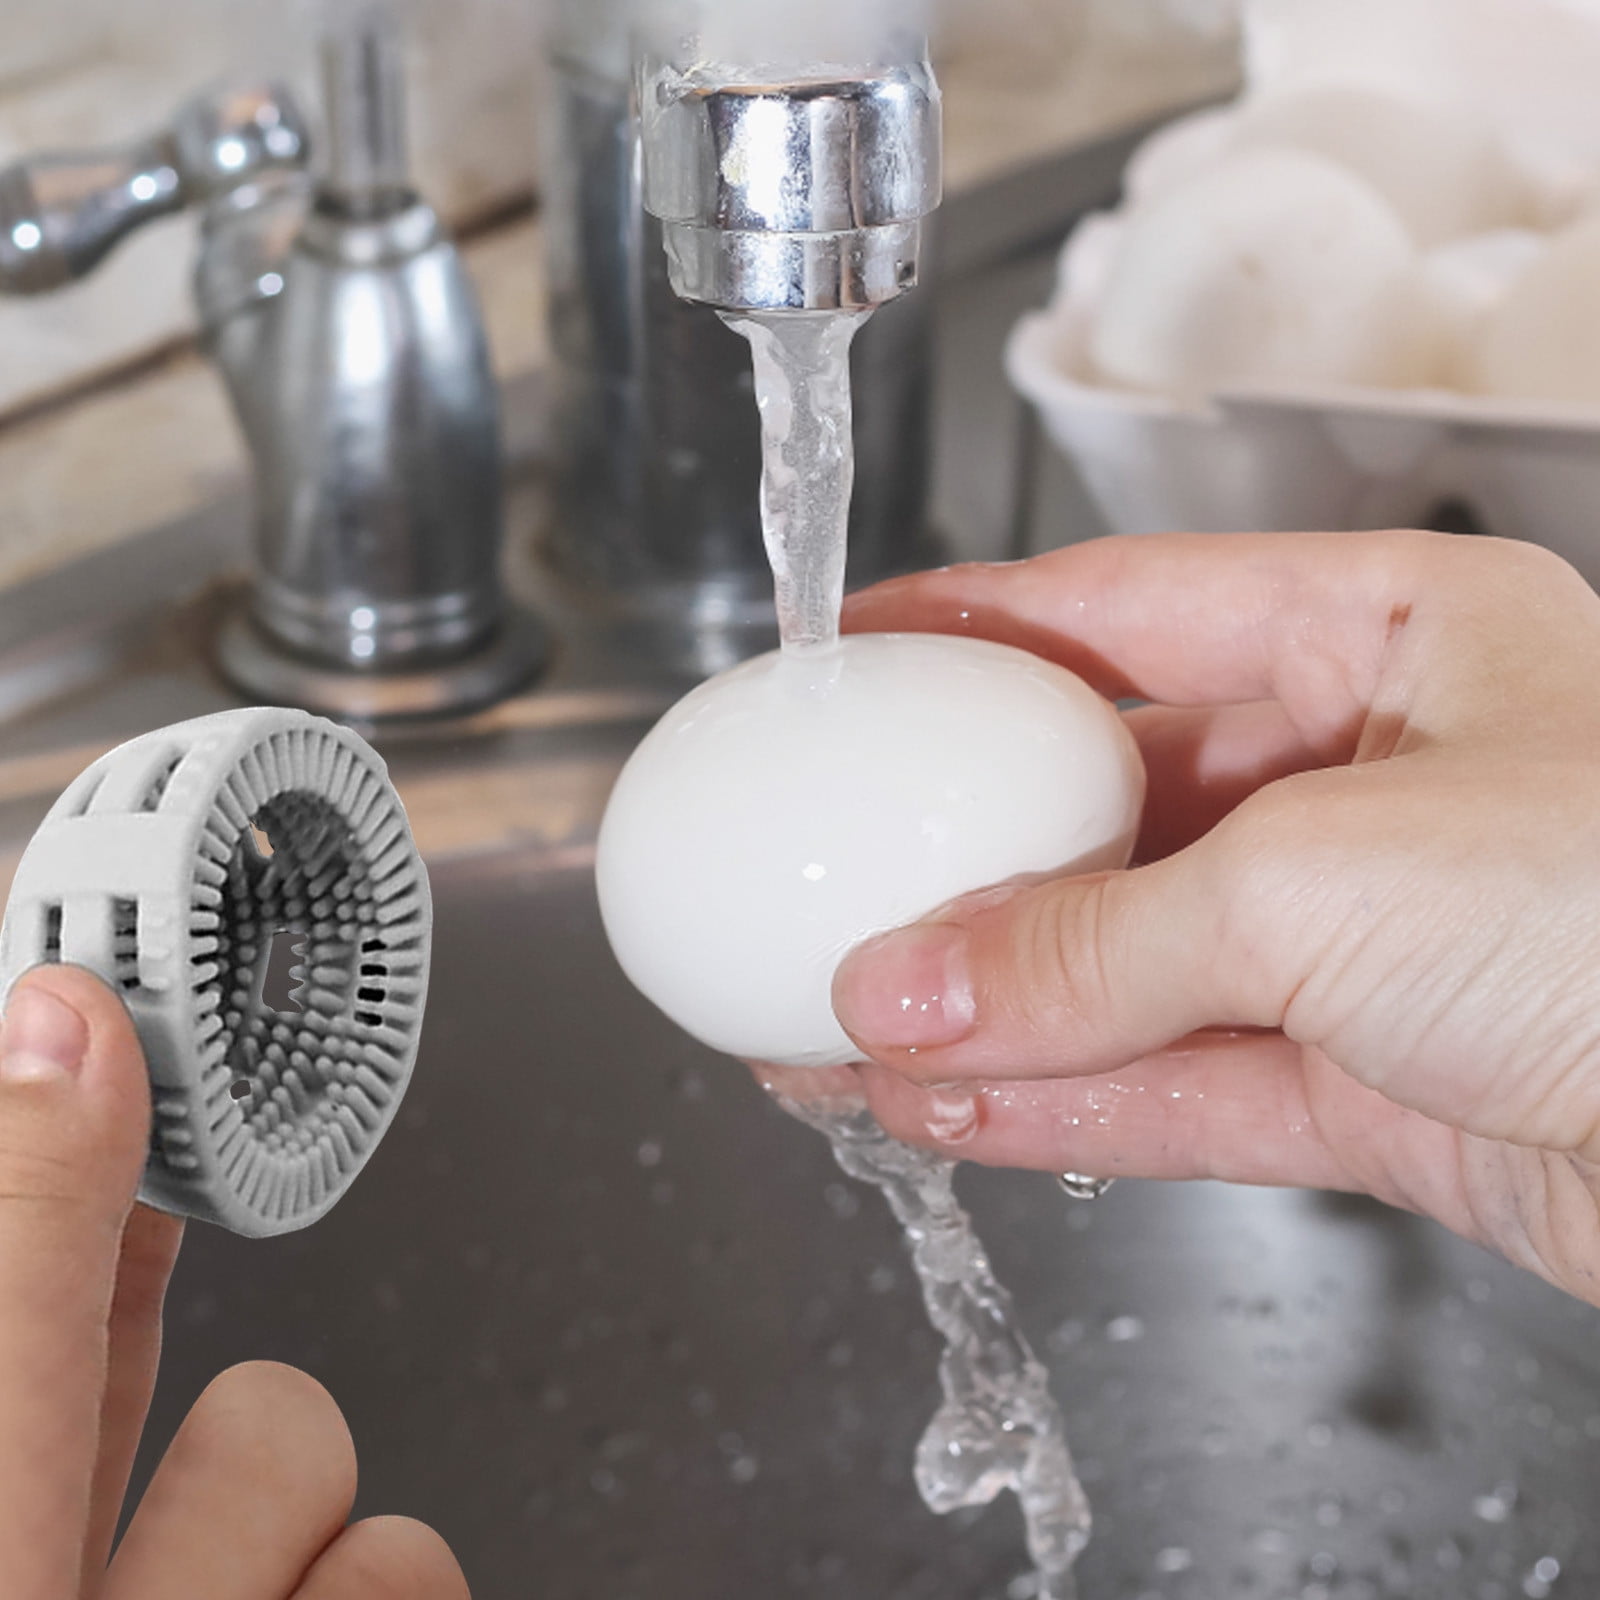 Flexible Silicone Egg Cleaning Brush Kitchen Tools Egg Cleaner Egg Brush  Farm A+